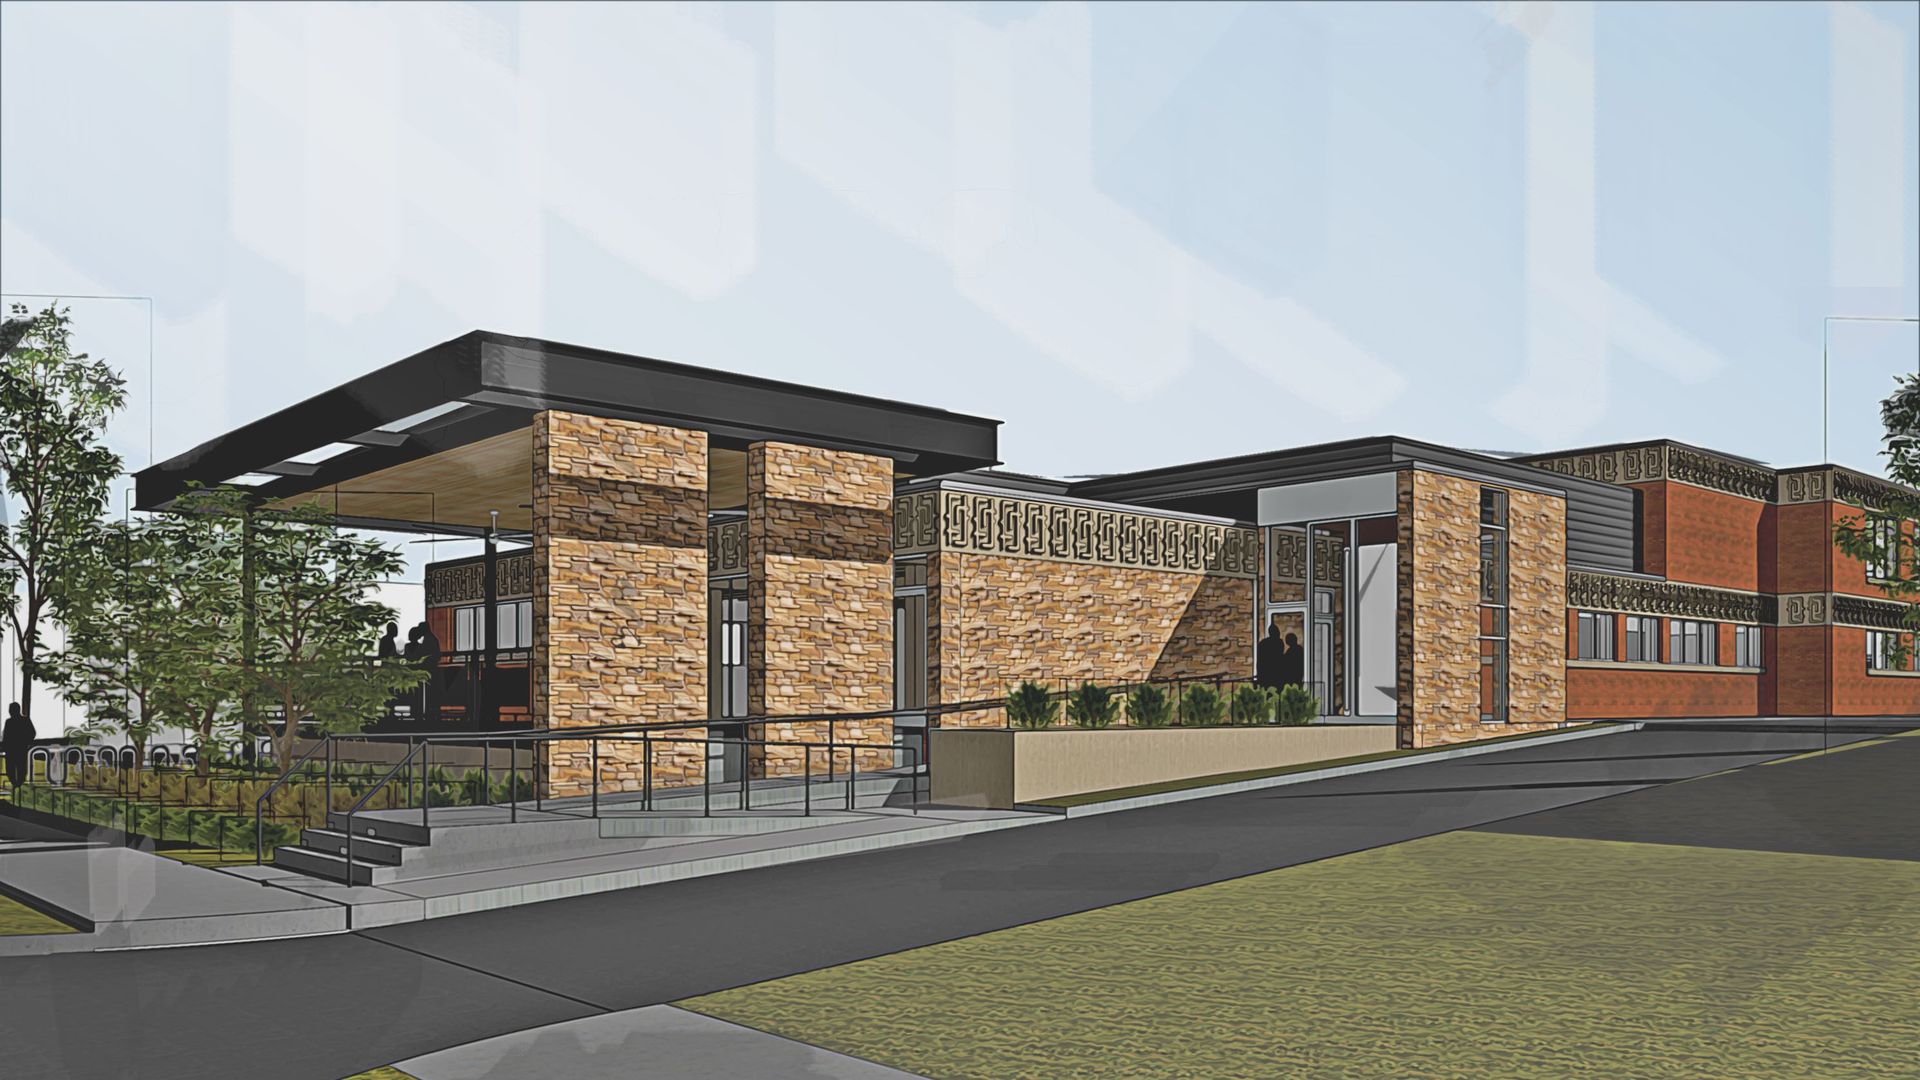 A drawing of a proposed Meals on Wheels center in Des Moines.